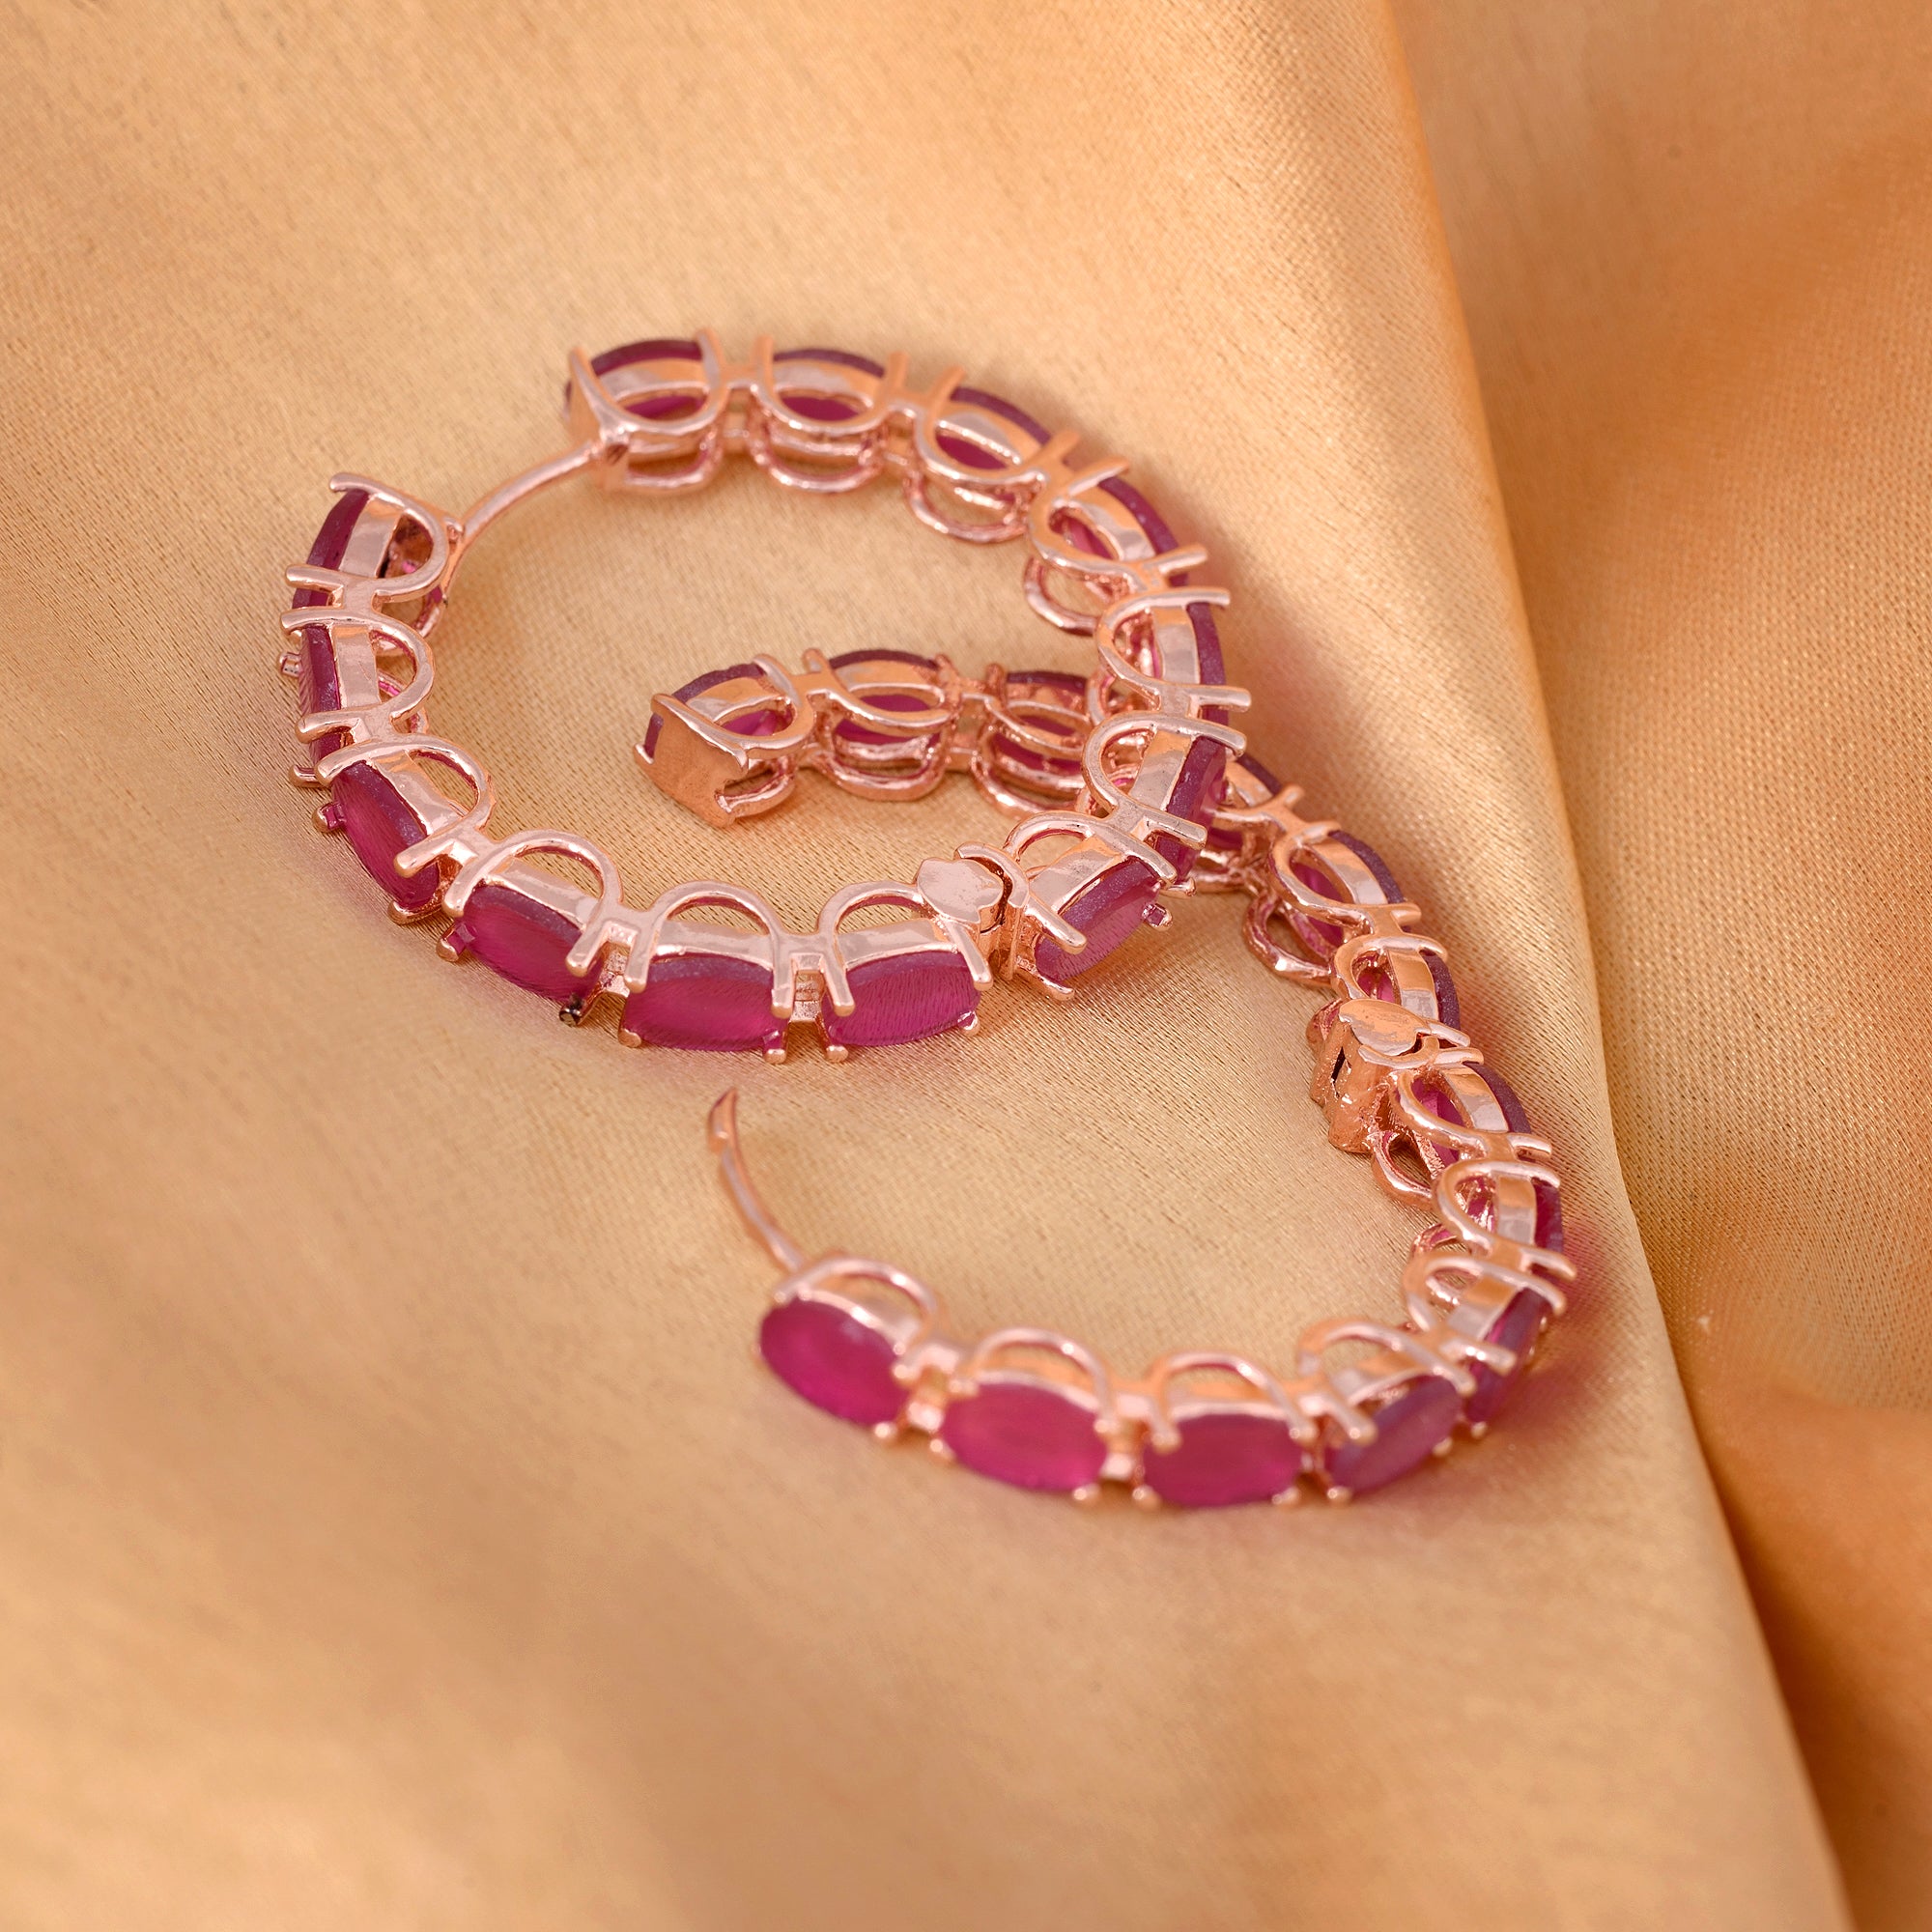 Magenta Studded Hoops Rose Gold Plated Pink Round Big Earrings for Women and Girls - Saraf RS Jewellery